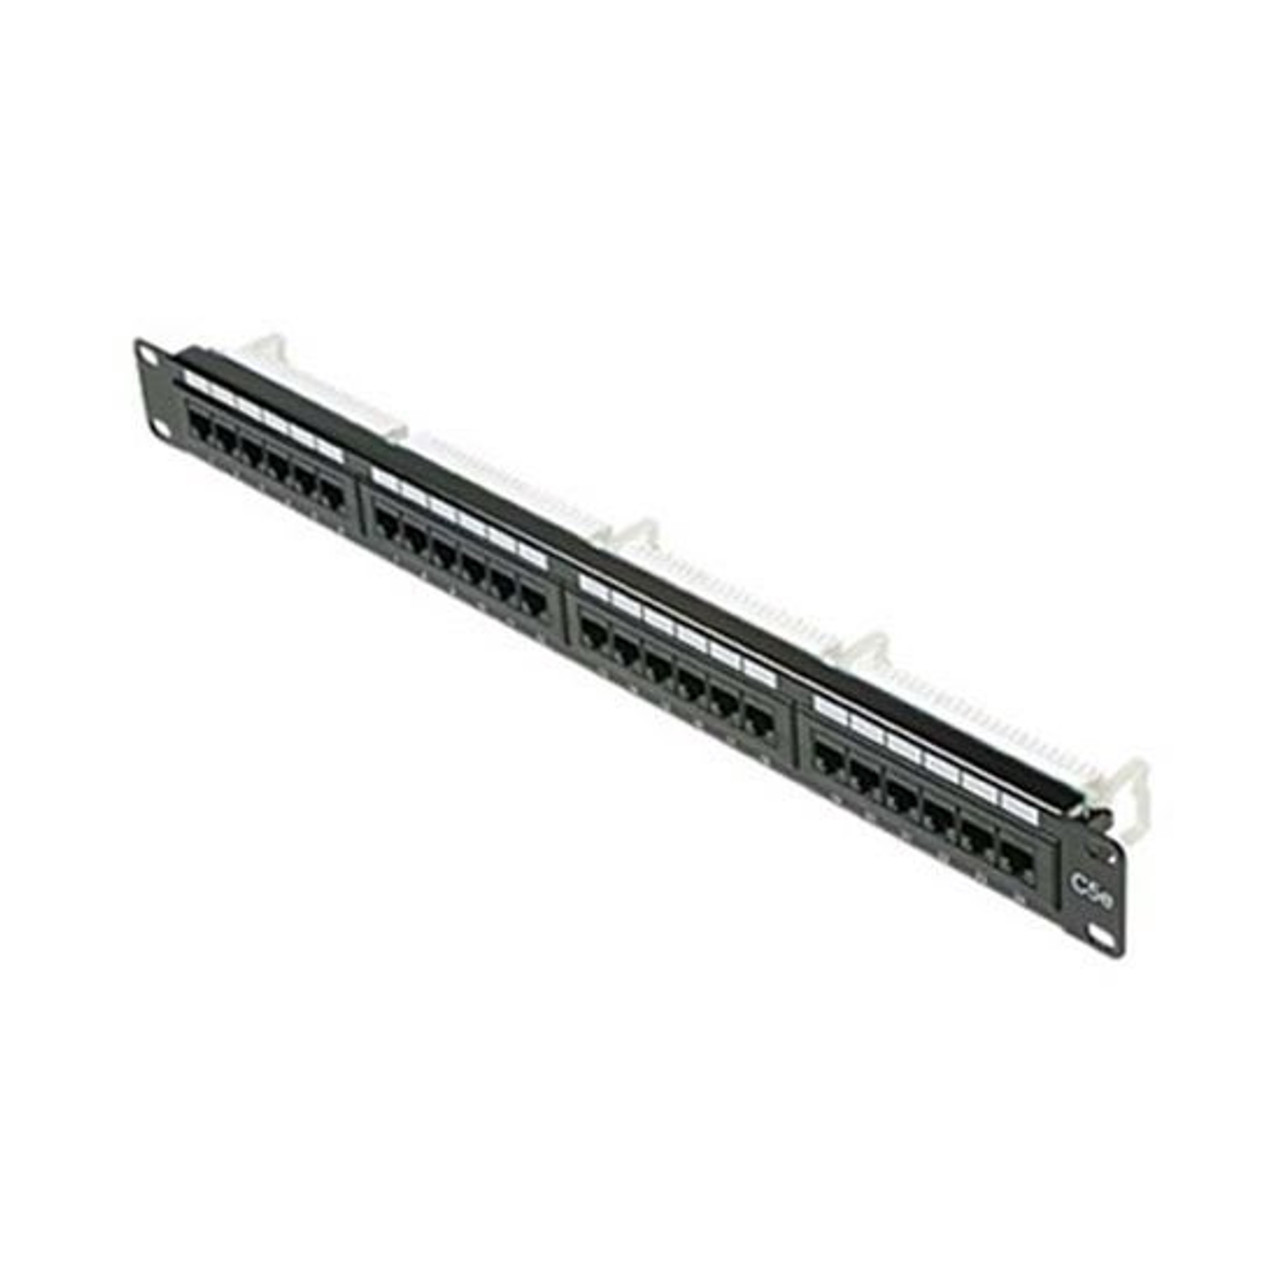 Eagle 24 Port CAT5E Patch Panel 110 Punch Down Pro Grade Fast Media Rack 19" Inch Rack Mount RJ45 110-IDC UL 22-26 AWG Strain Relief System Ethernet Loaded